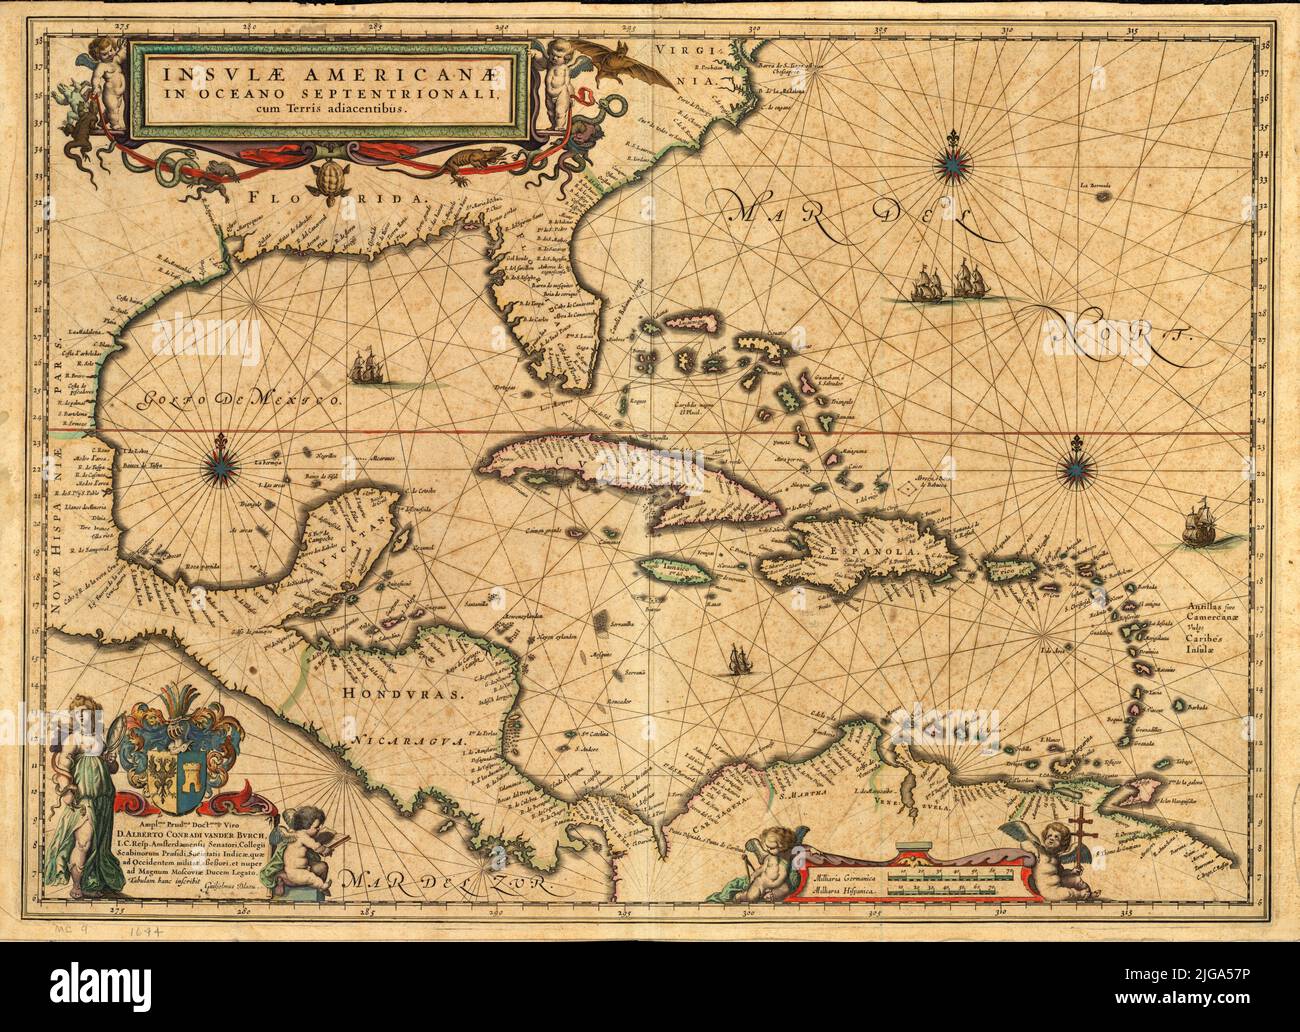 Map of Islands of Americas, 1644, by Willem Janszoon Blaeu Stock Photo